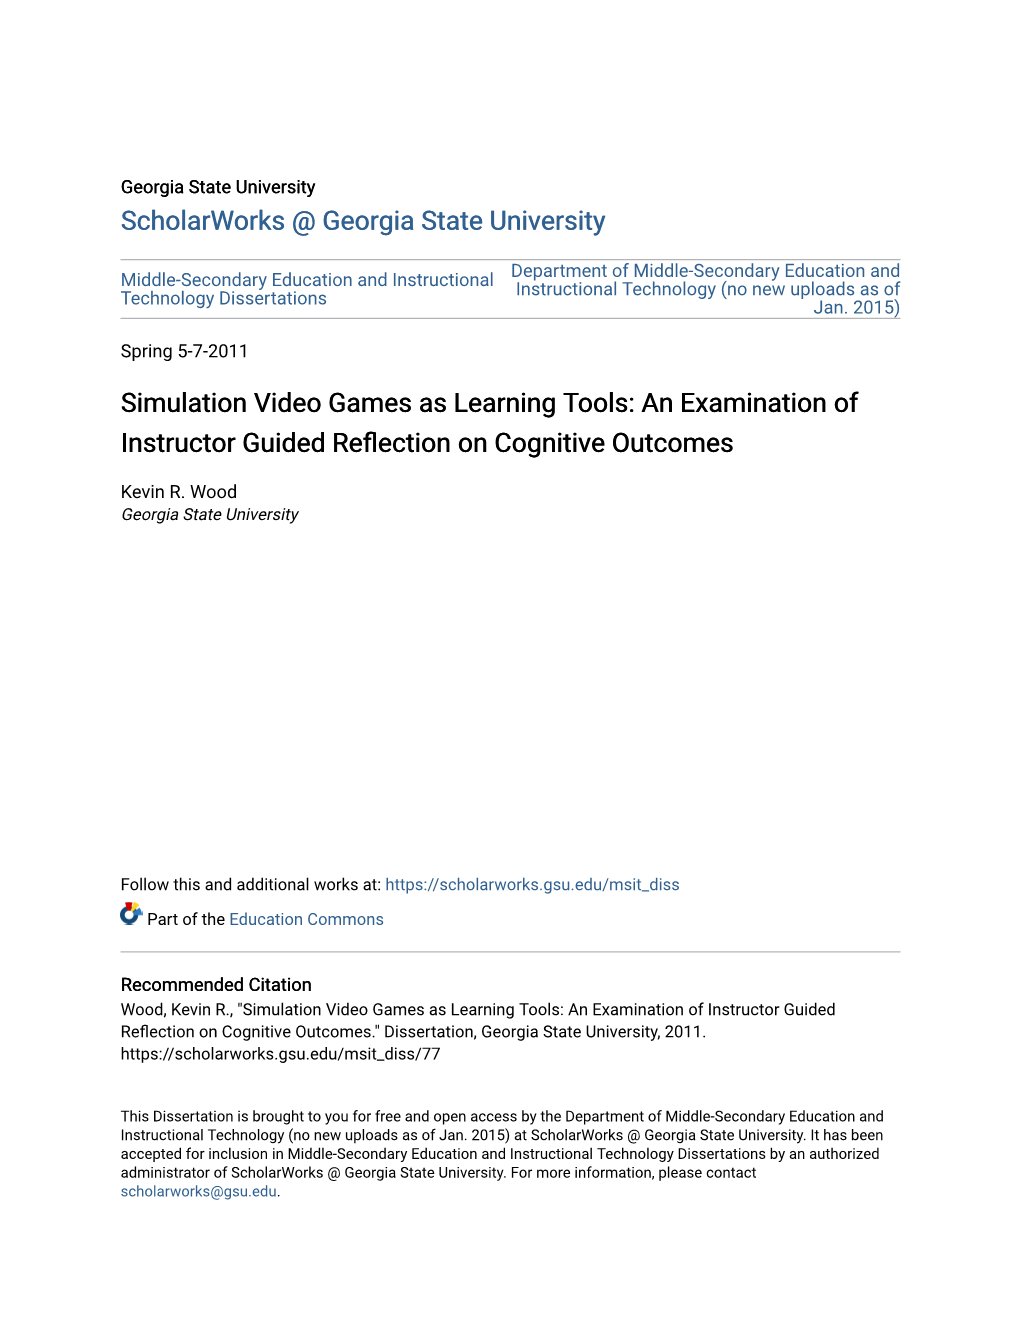 Simulation Video Games As Learning Tools: an Examination of Instructor Guided Reflection on Cognitive Outcomes